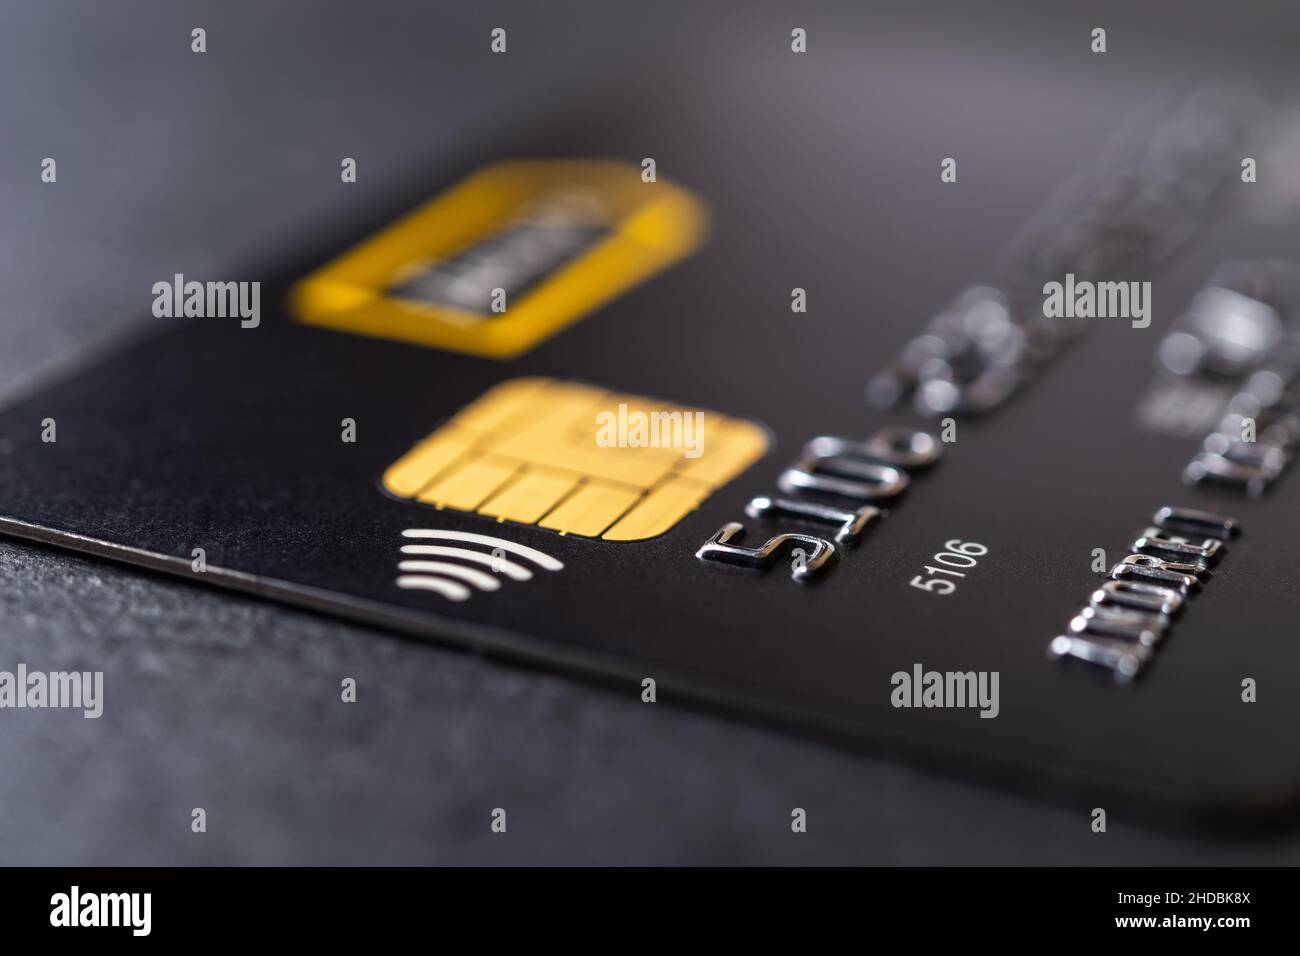 Credit card with chip and contactless technology macro. Black debit card for cash withdrawals and money transfers. Payment for goods and services. Stock Photo